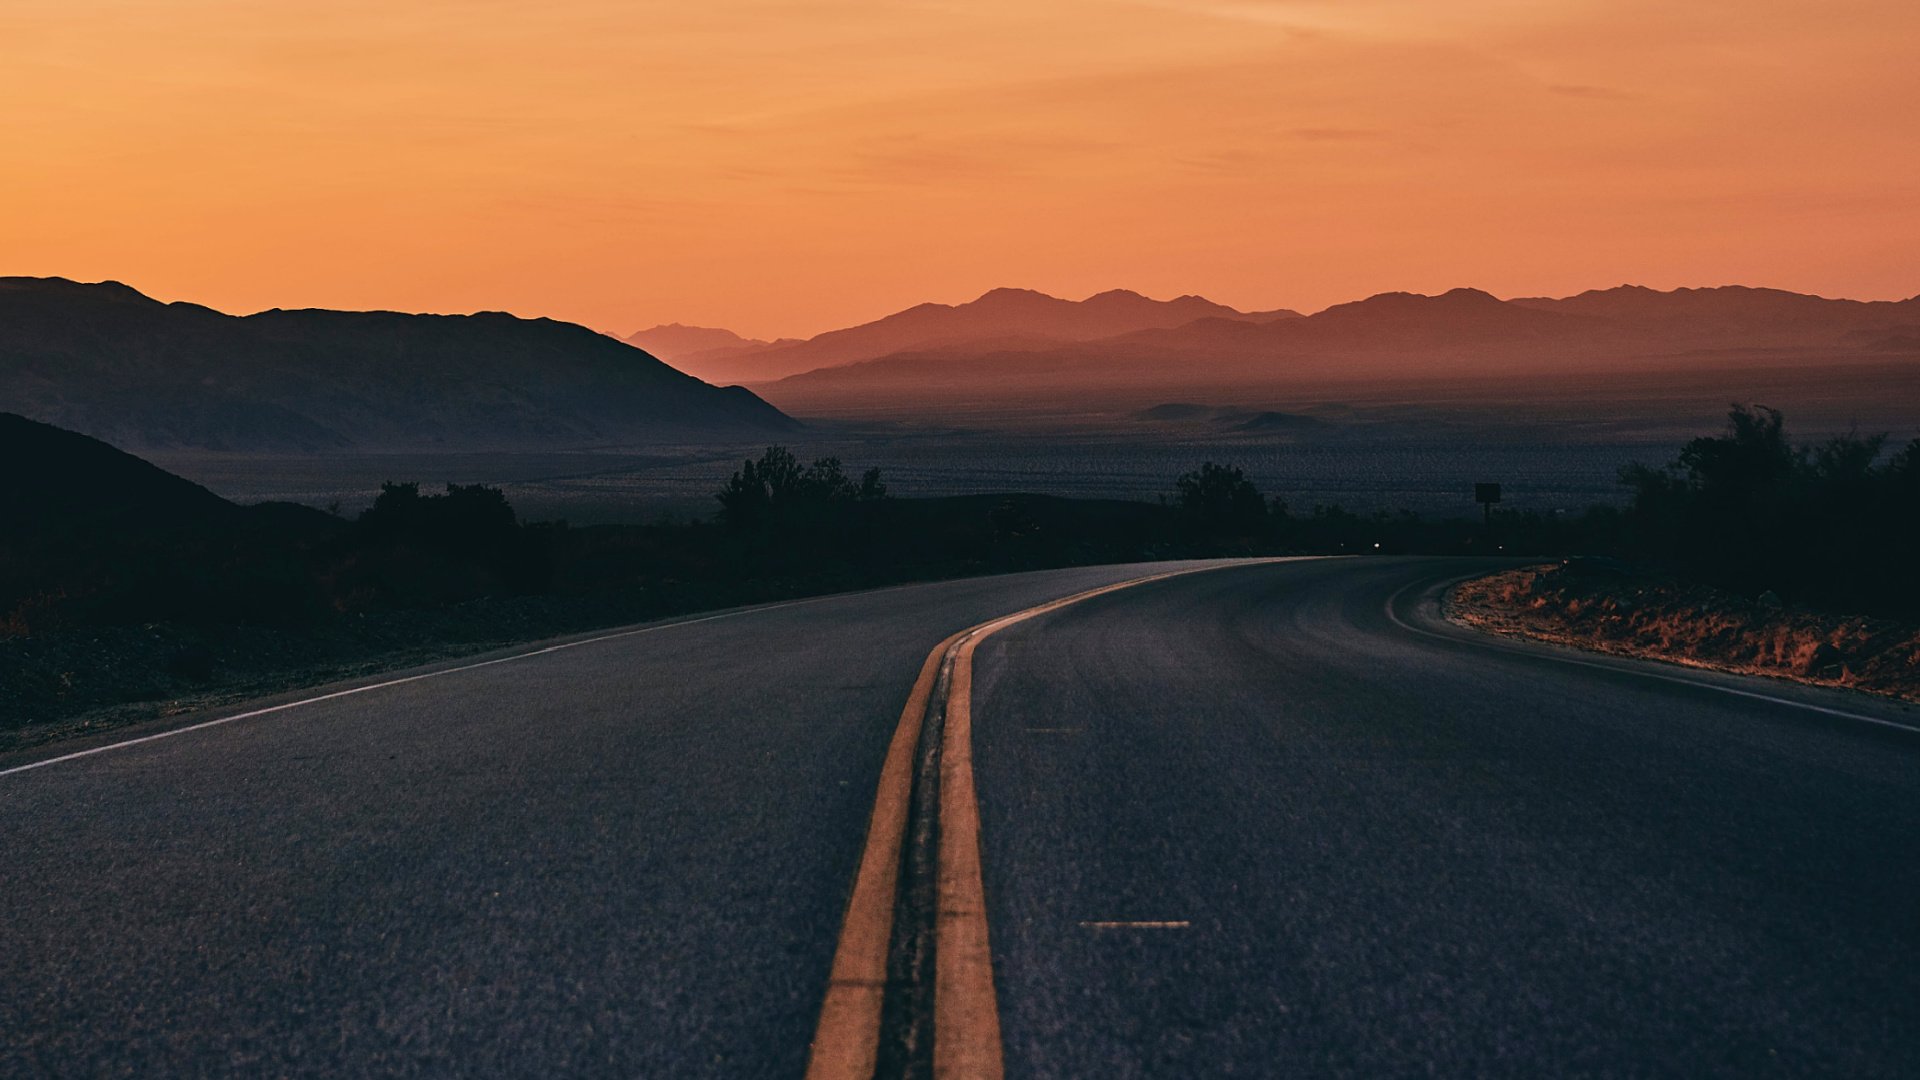 Close-up of highway curving to the right with sunset and mountains in the distance